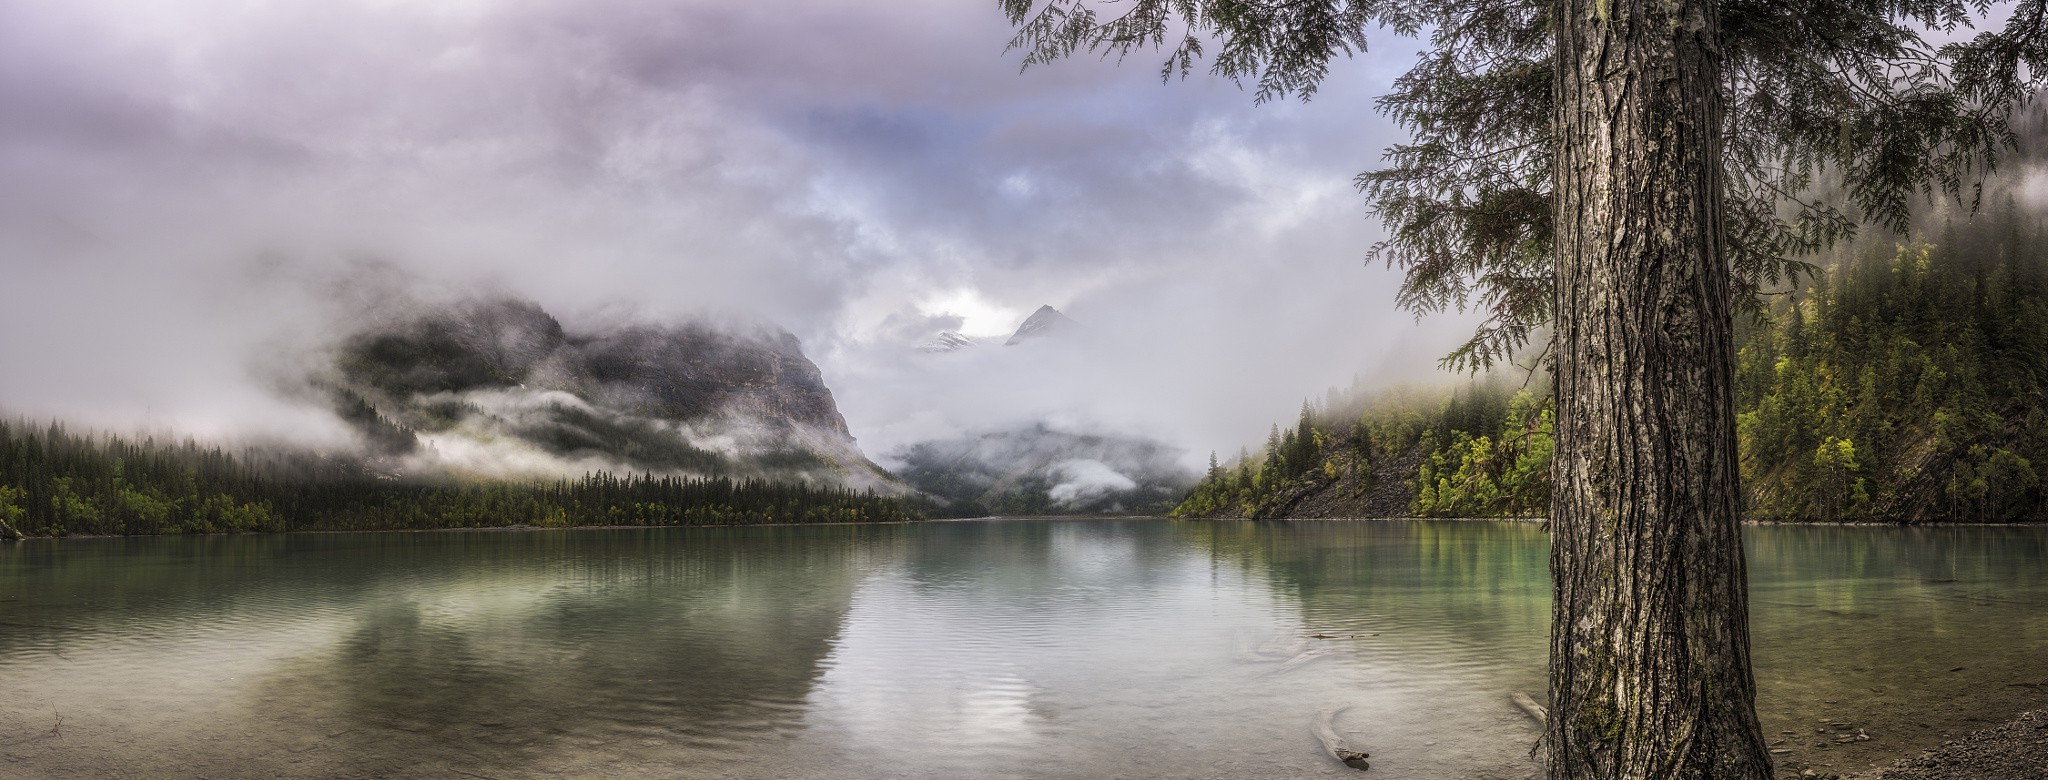 nature, Landscape, Lake, Mist, Panoramas, Forest, Mountain, Clouds, Water, British Columbia, Canada, Trees Wallpaper